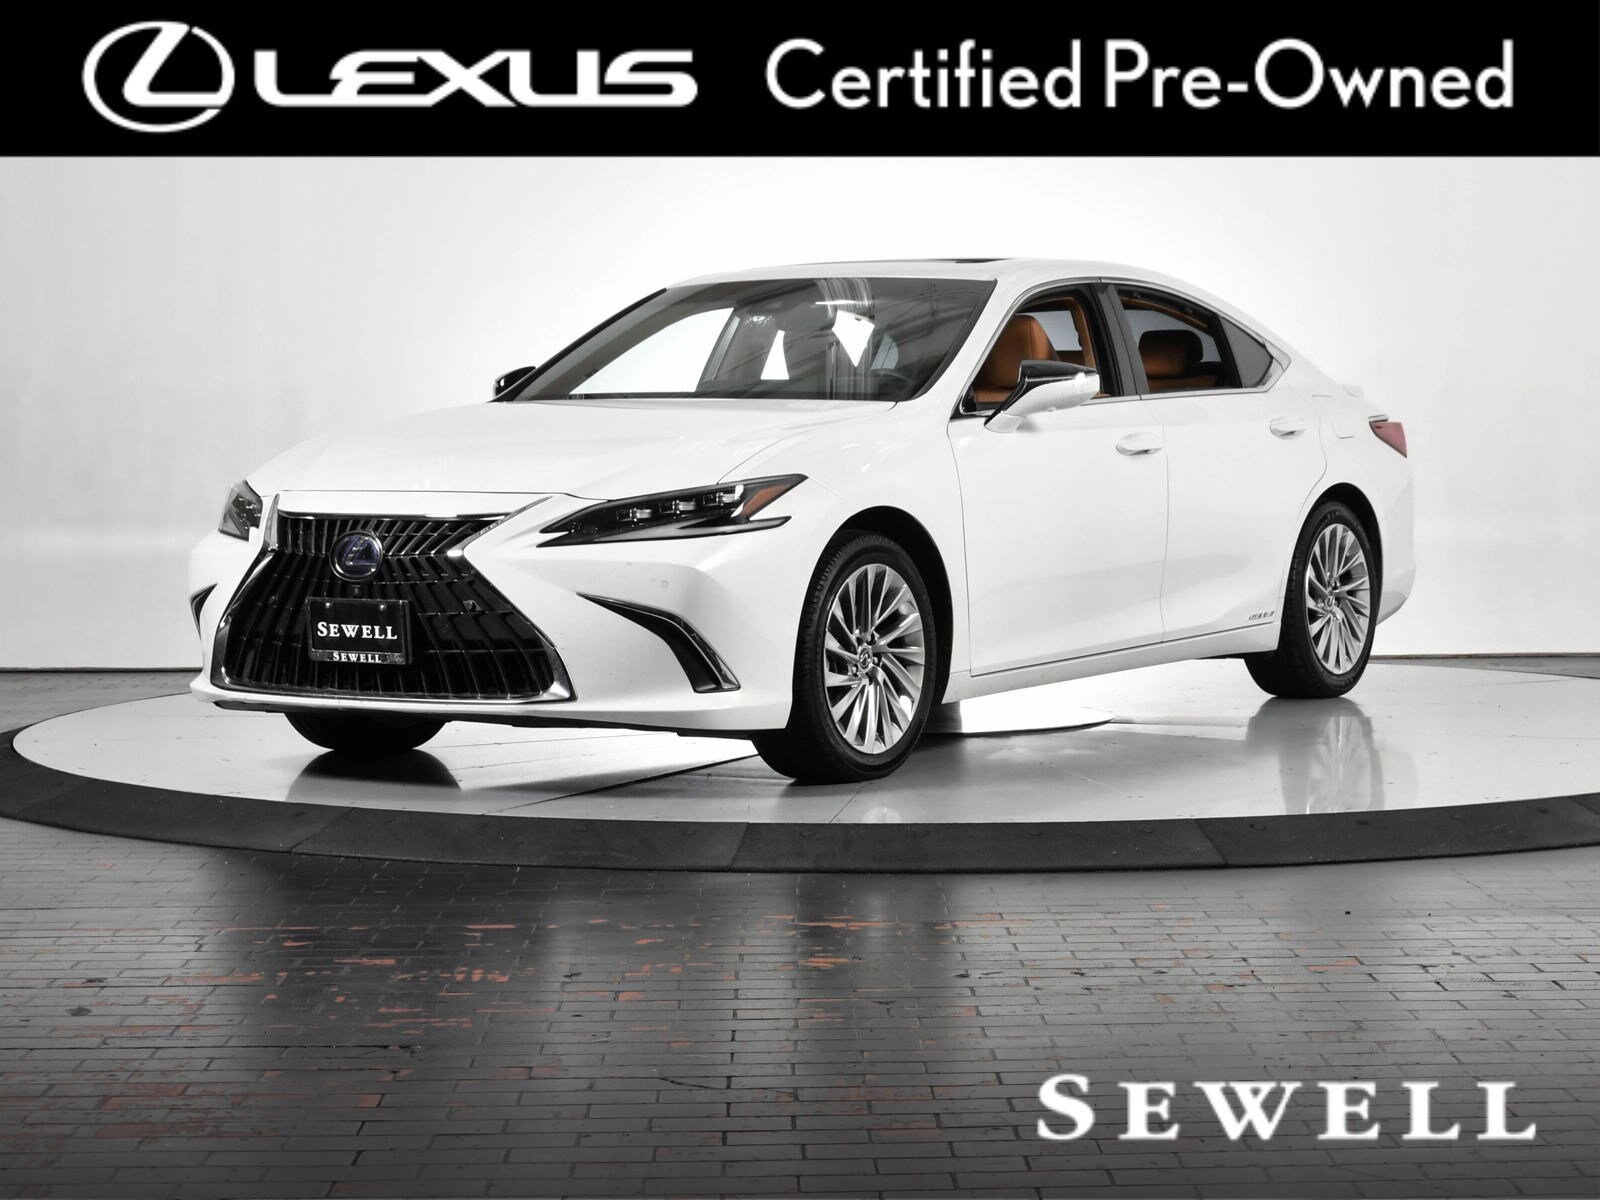 L Certified Inventory | Sewell Lexus of Dallas